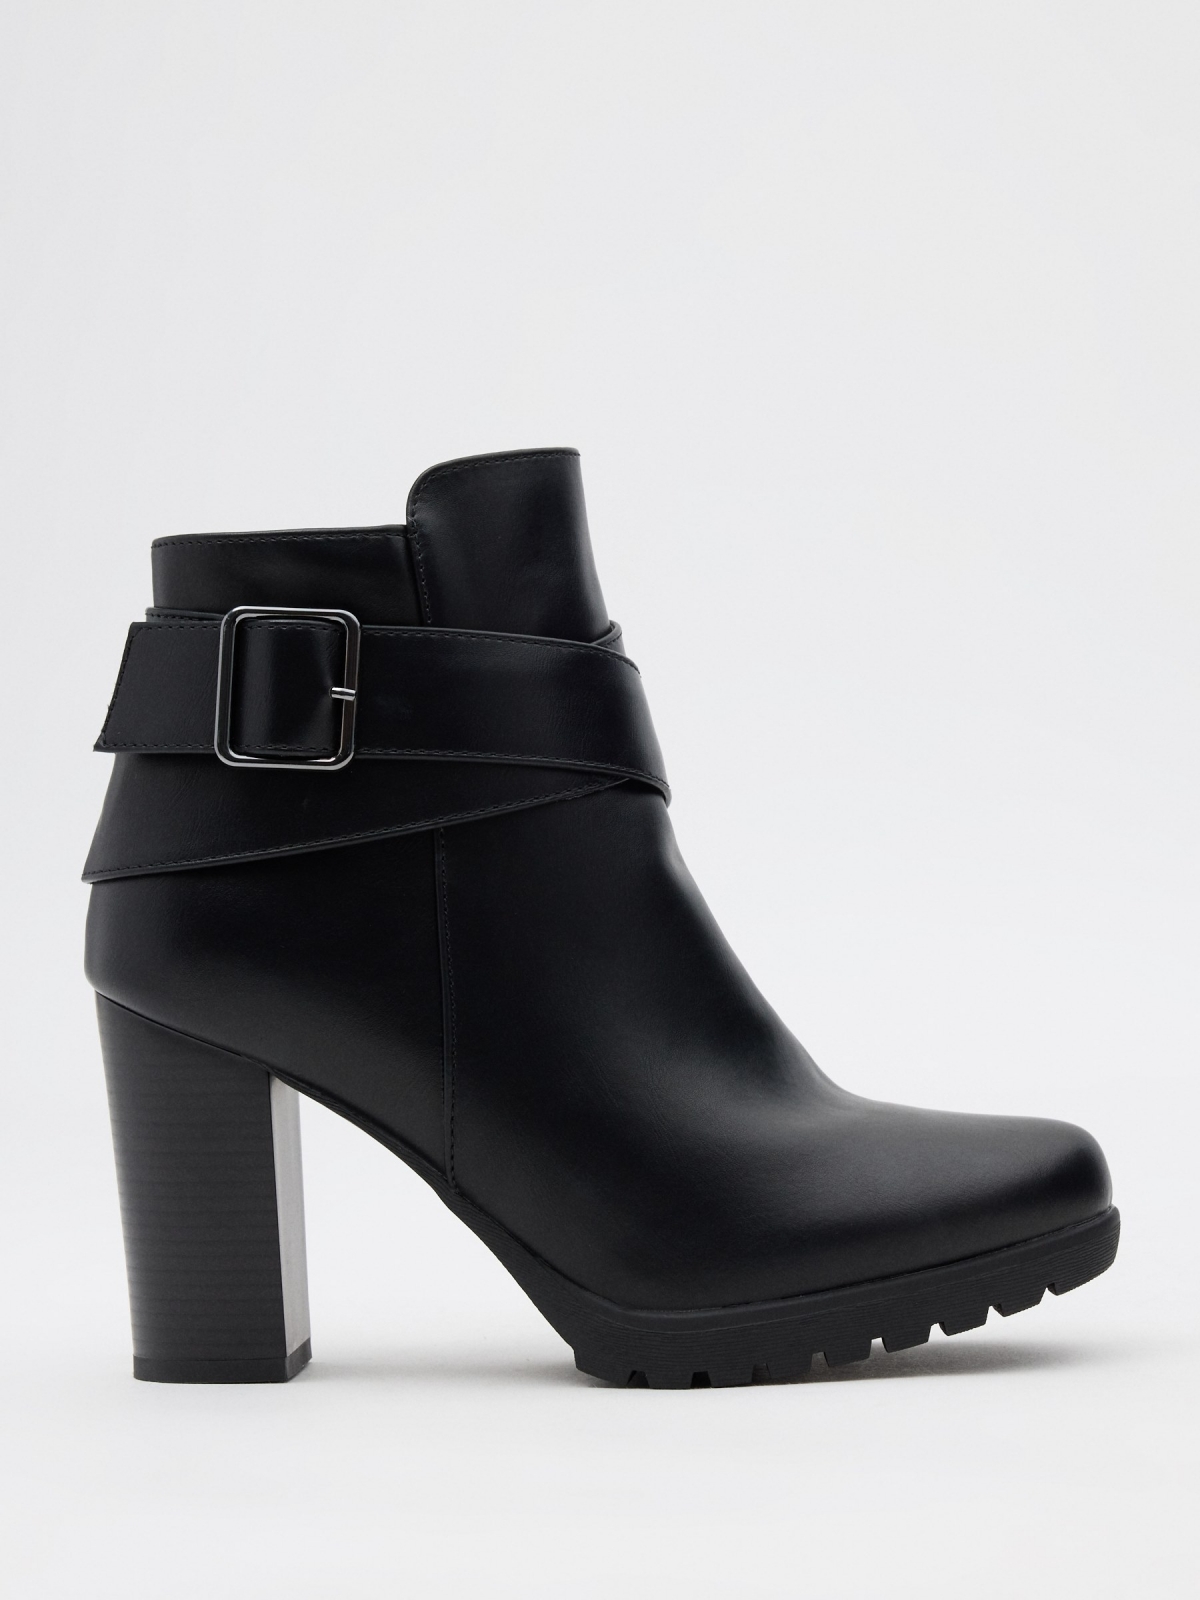 Ankle boots buckle cross straps black